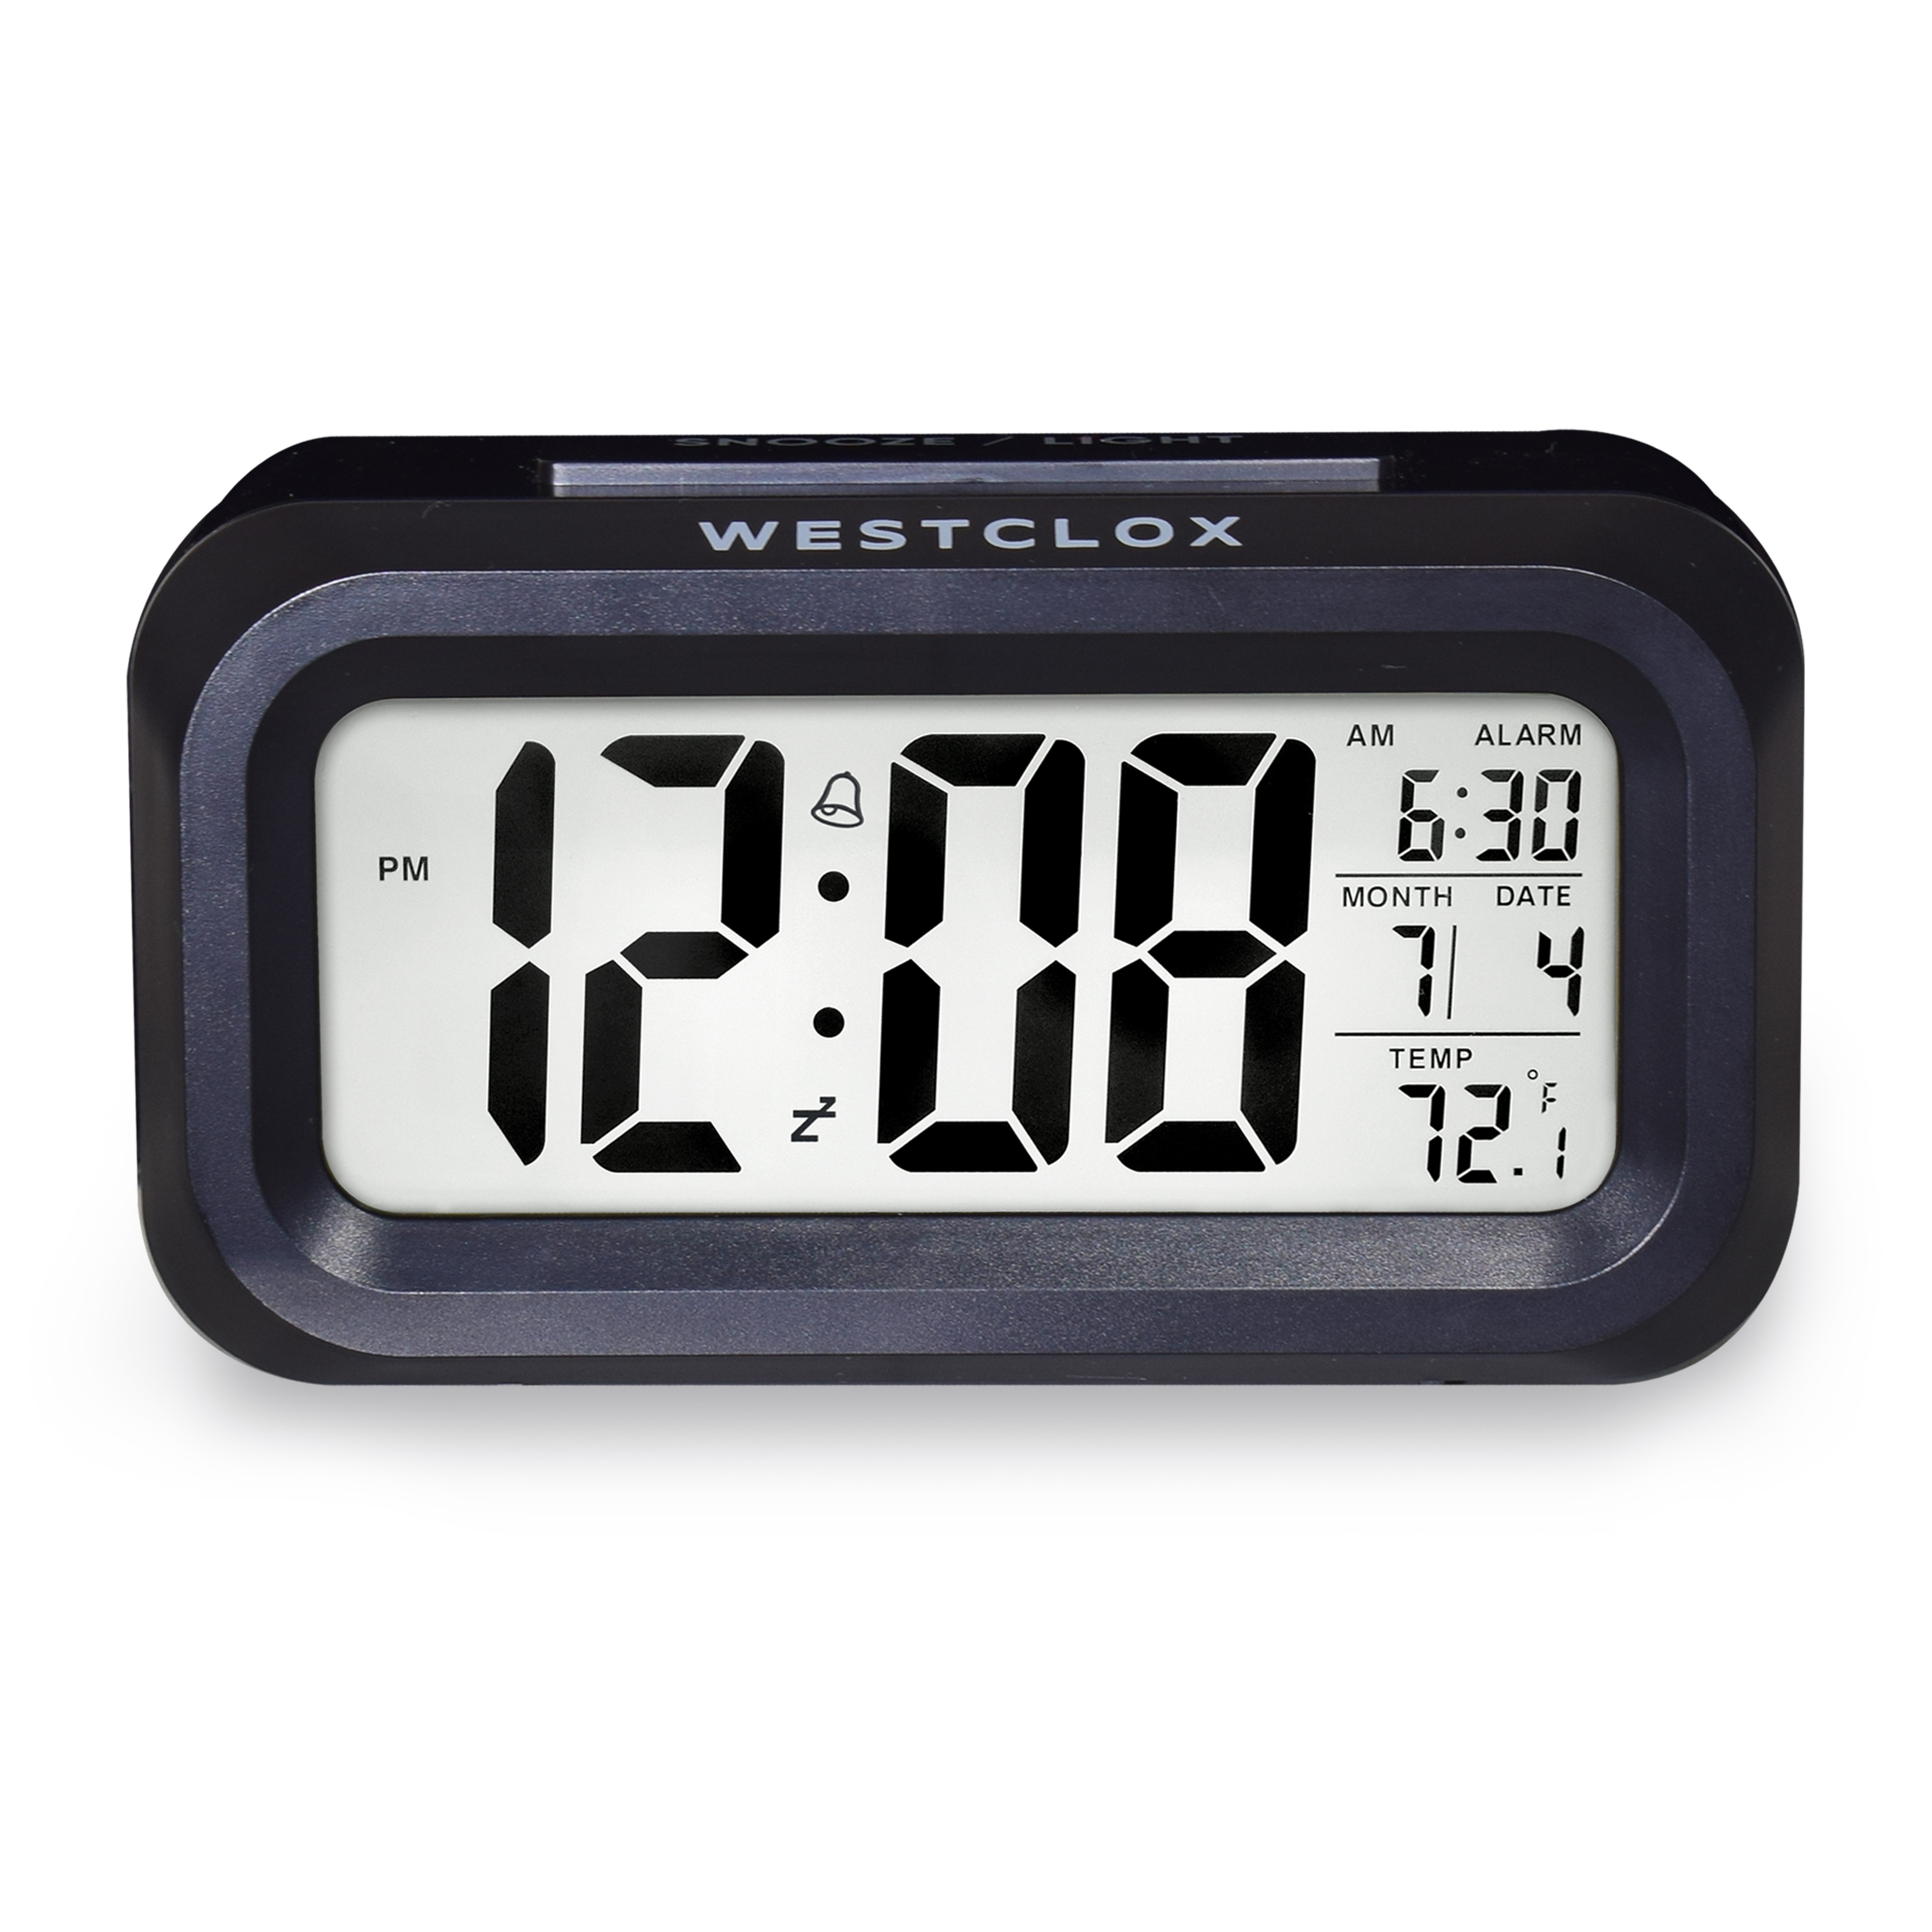 Mainstays Black Digital Alarm Clock with LED Backlight and Easy-to-Read LCD Display - image 1 of 5